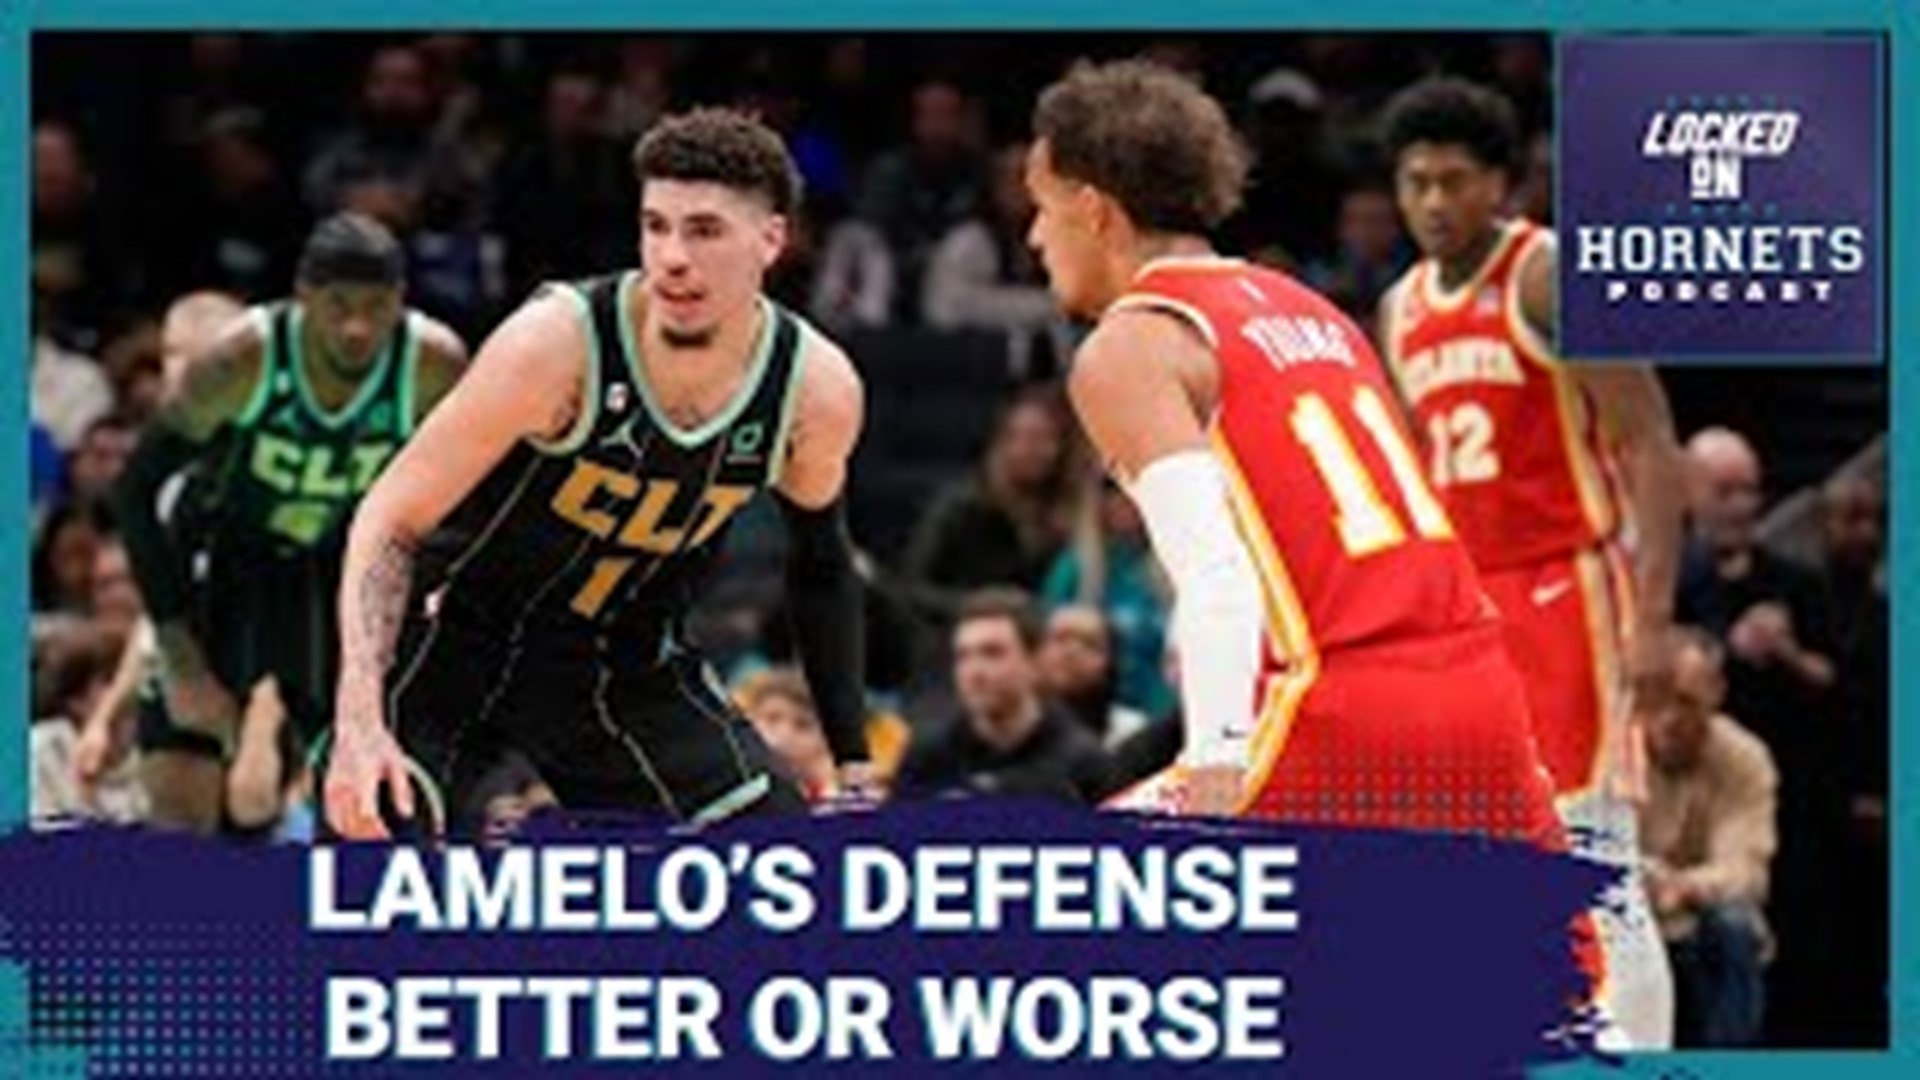 Hornets' LaMelo Ball nearing return to action from wrist injury